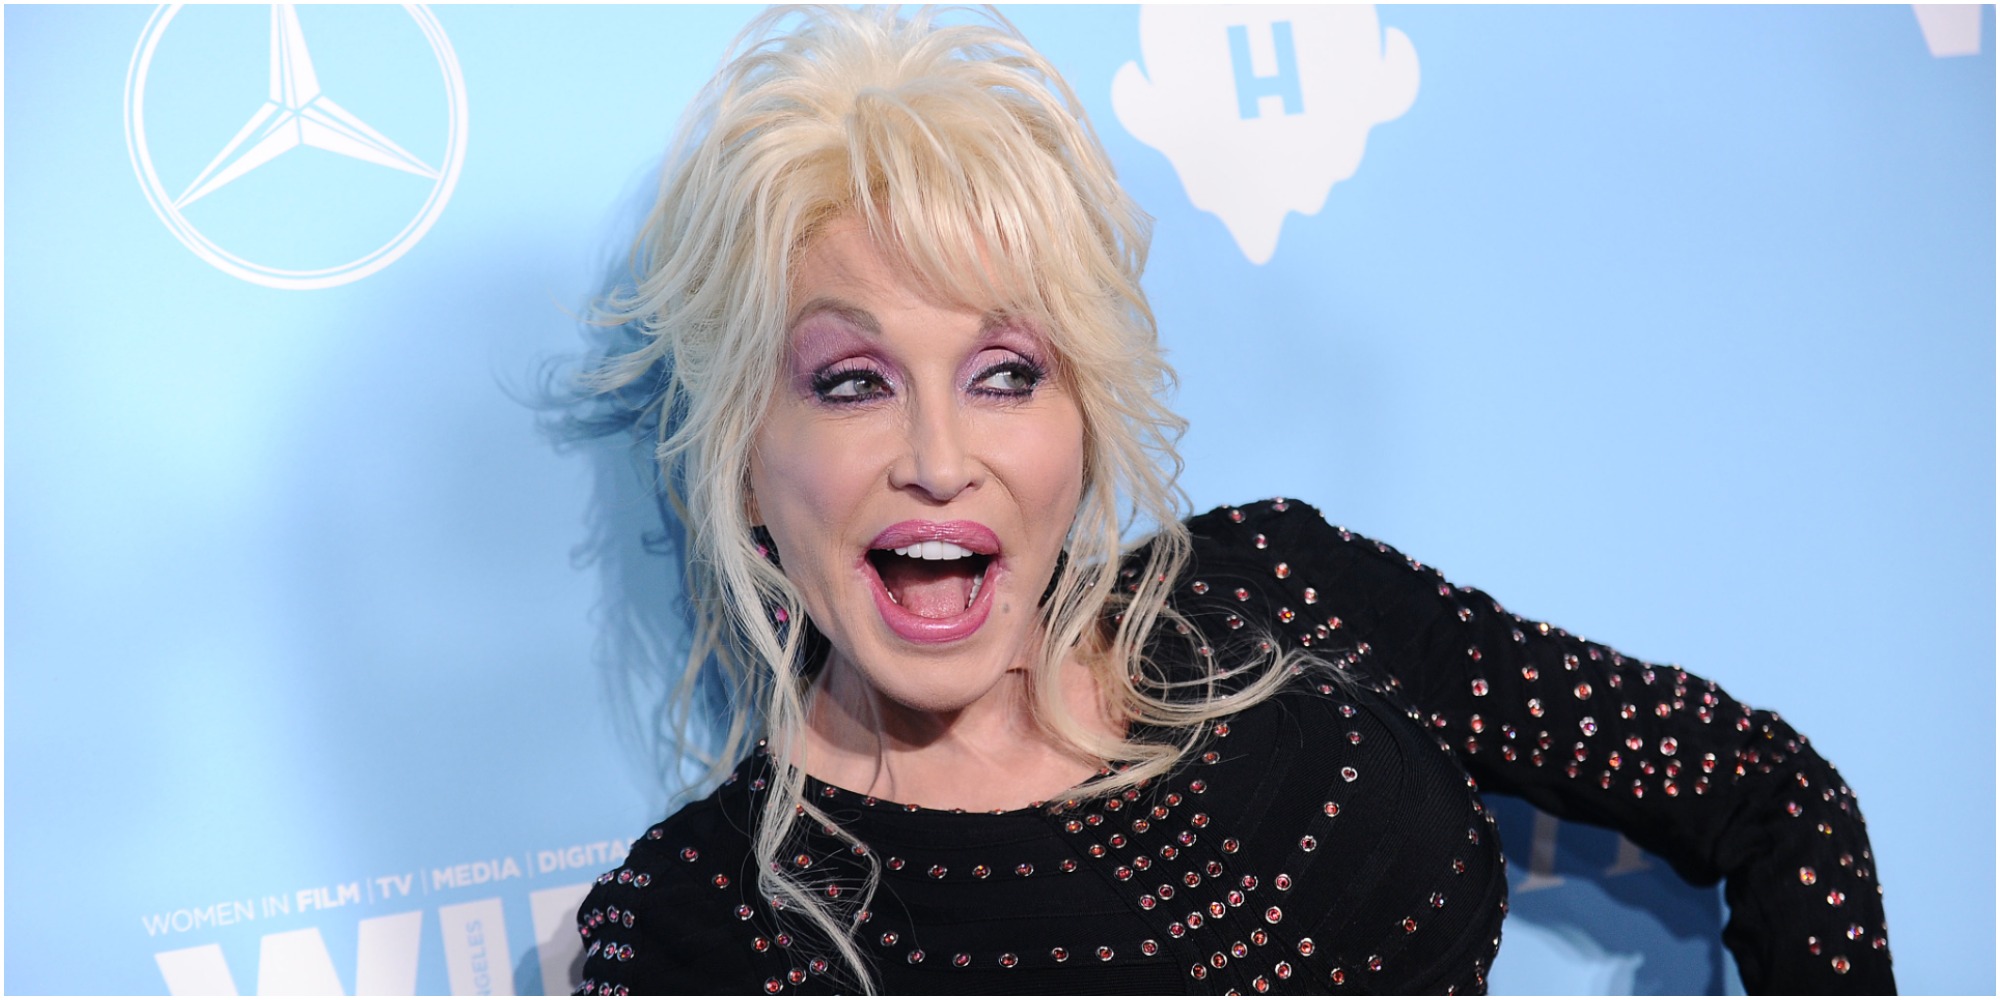 Dolly Parton takes a photo with her mouth open.